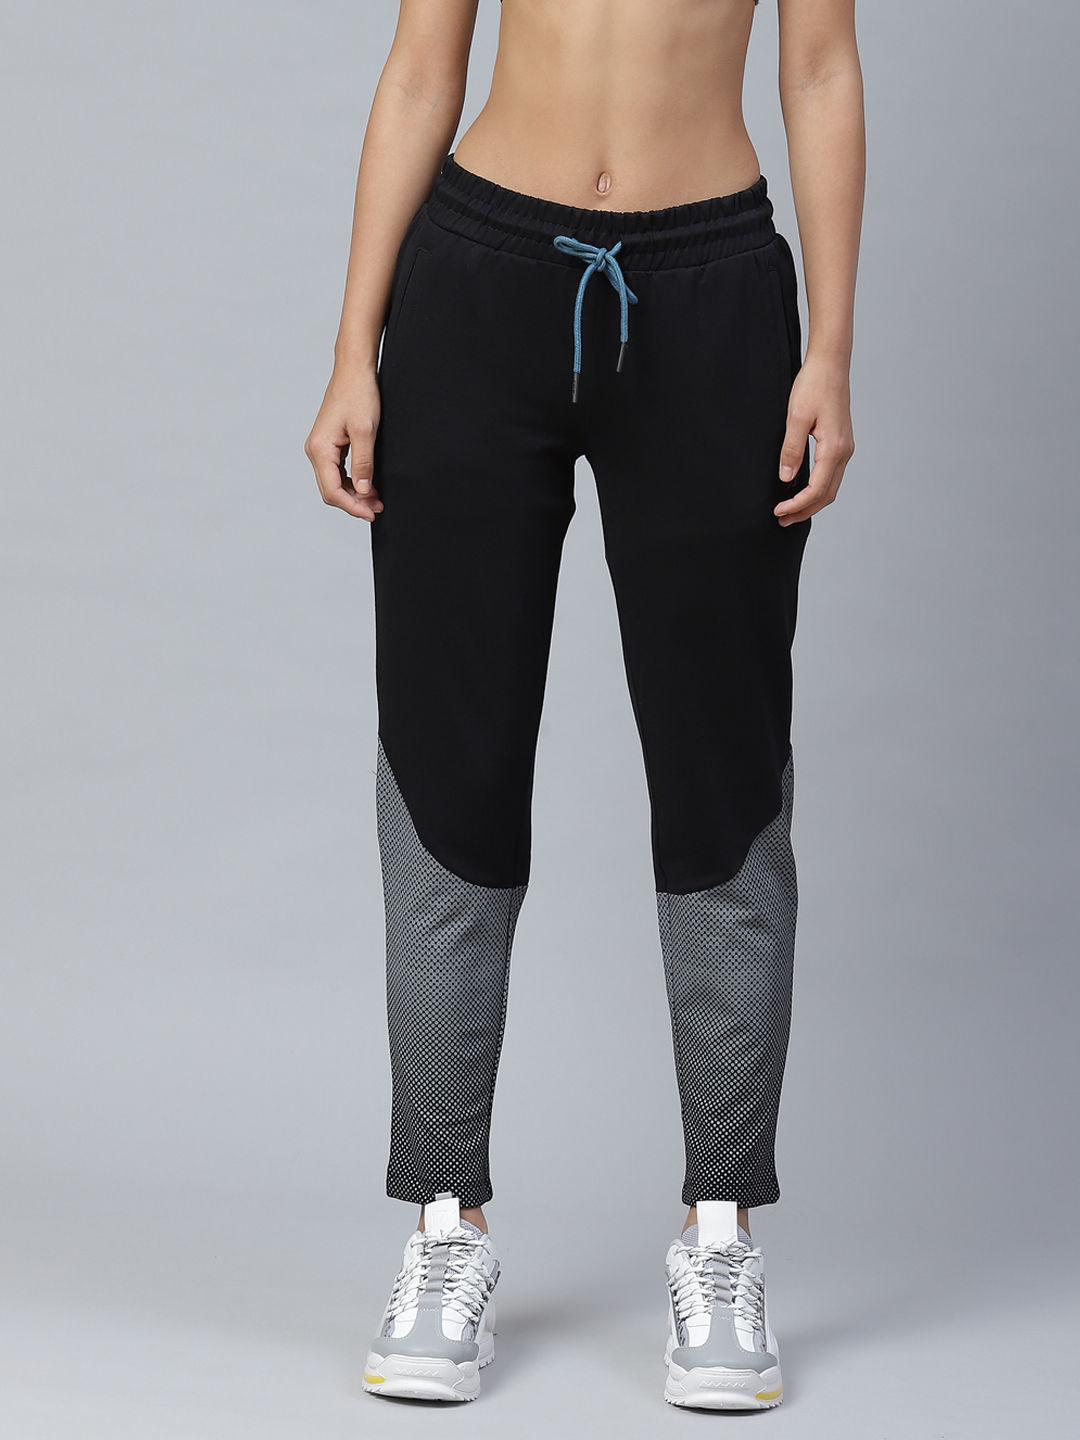 Women's Slim Fit Poly Cotton Track Pants in Latur at best price by Newsun  Innovaation - Justdial